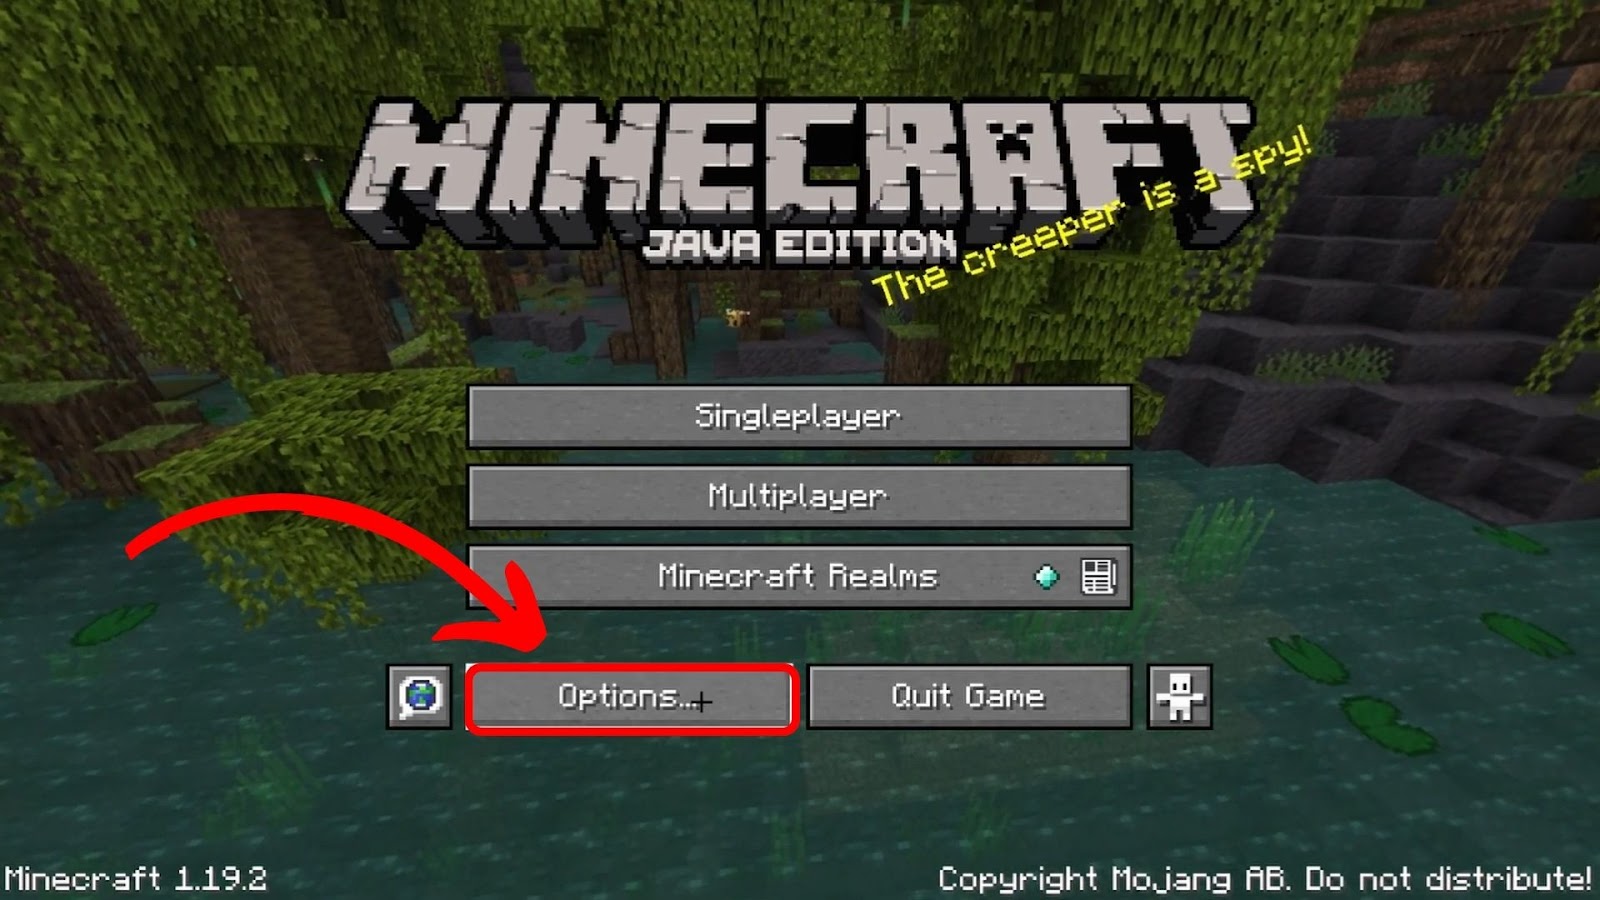 Accessing the Options Menu in Minecraft